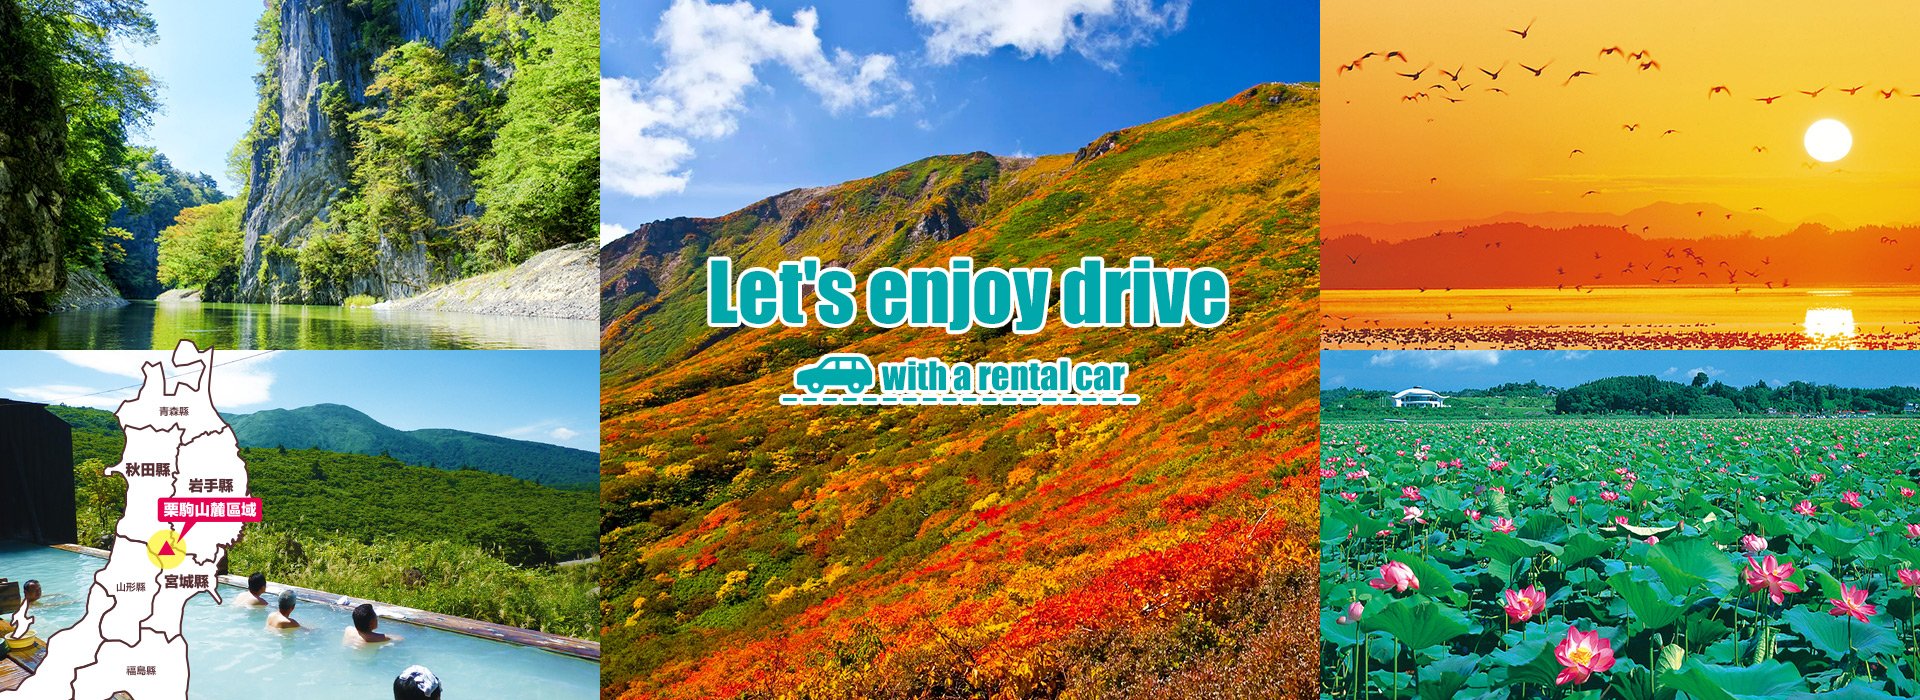 Let's enjoy drive with a rental car